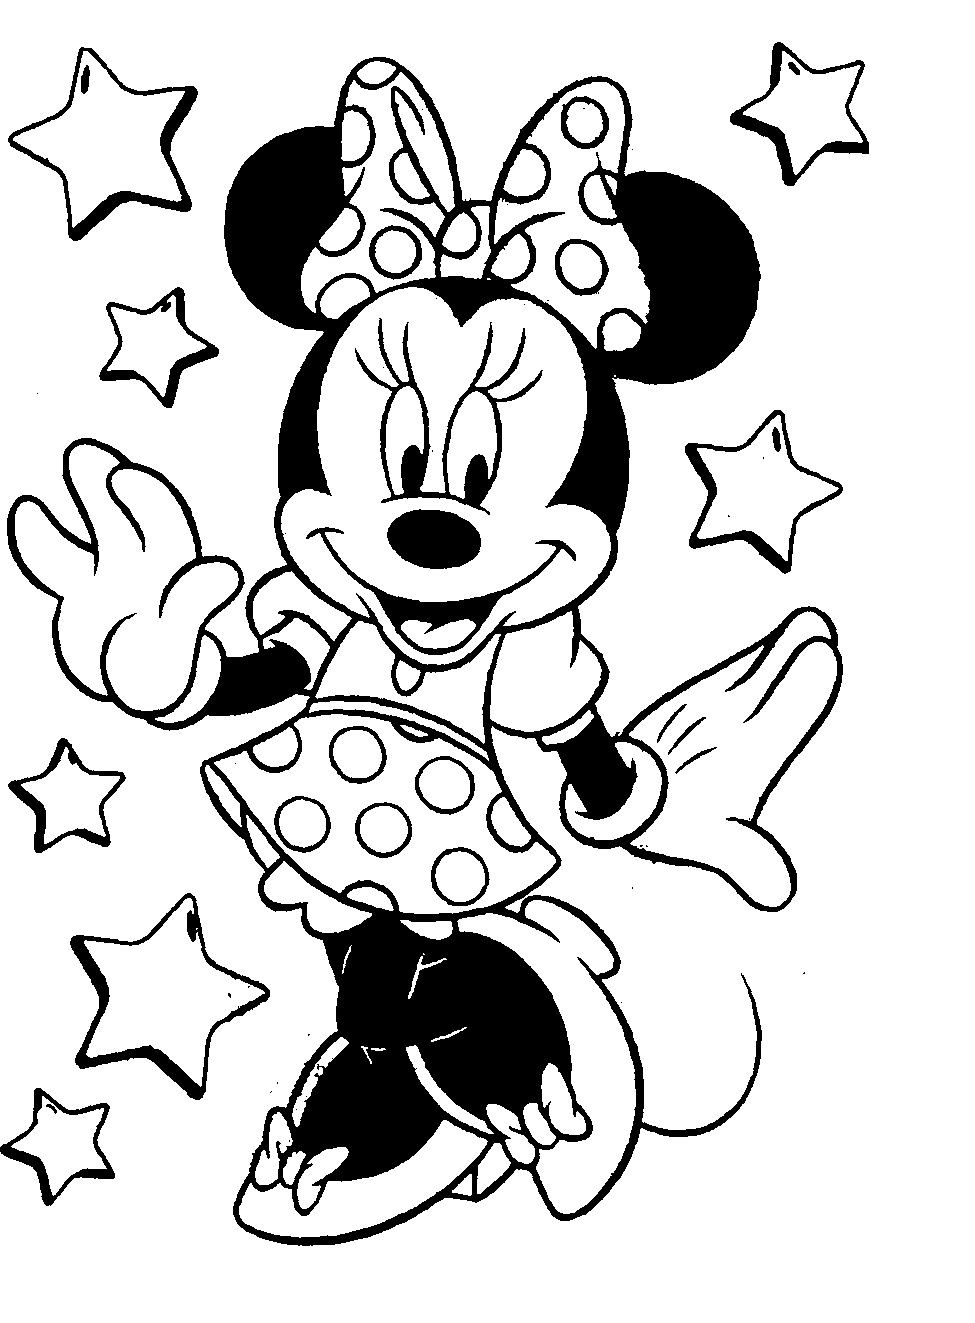 Free Printable Minnie Mouse Coloring Pages
 coloring pictures of minnie mouse Google Search